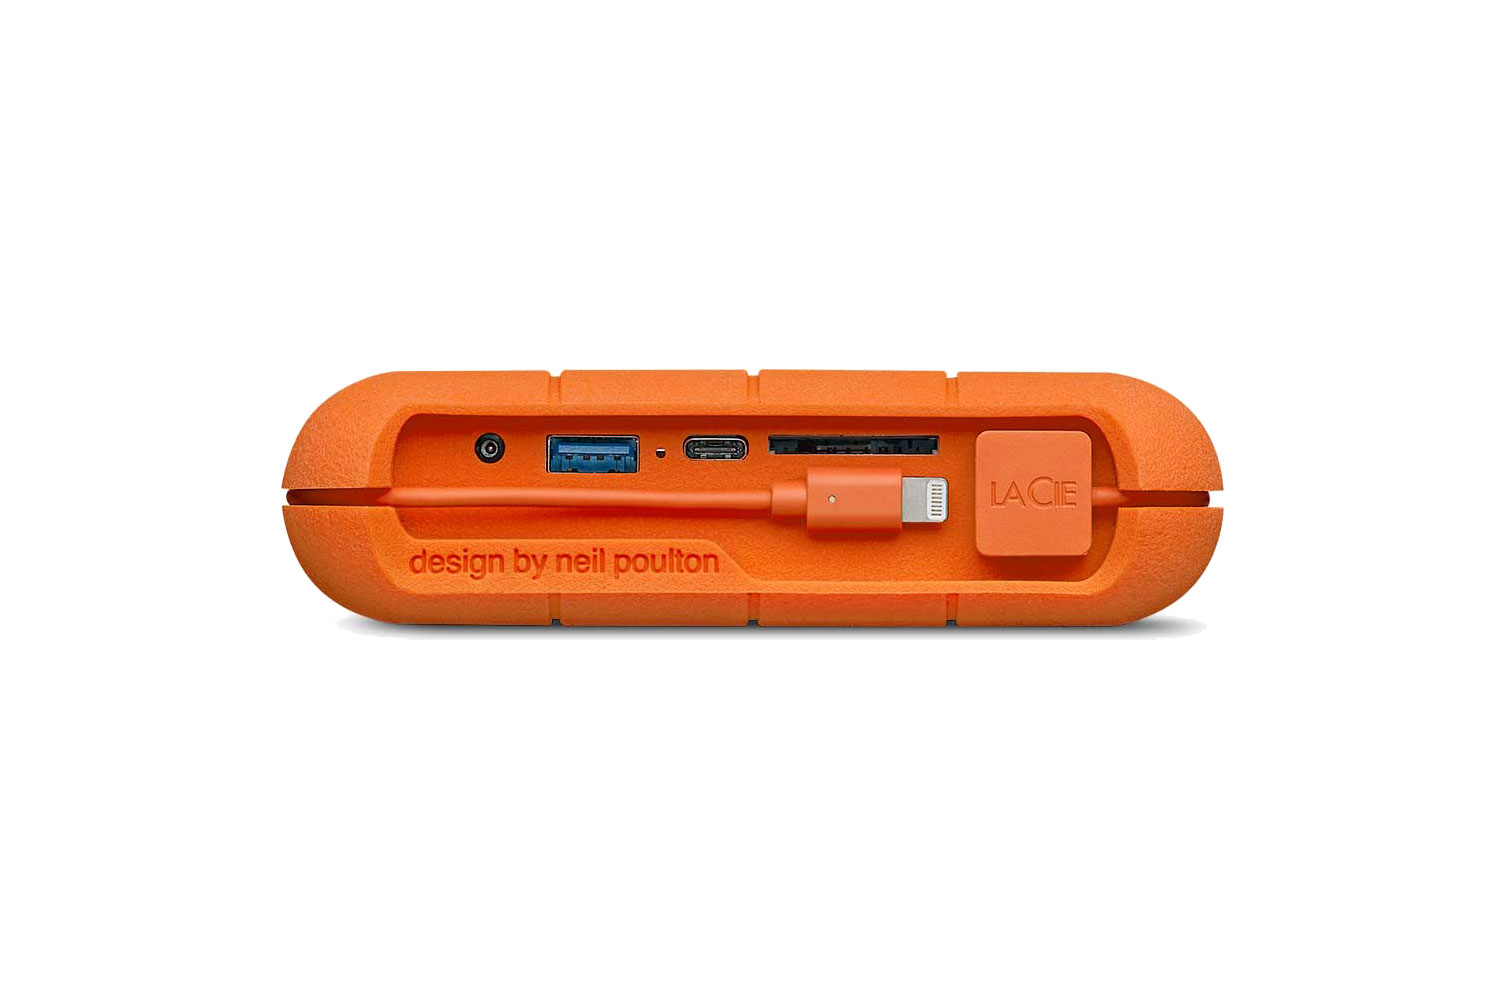 built on a fast ssd lacies computer free backup drive just got much better lacie rugged boss 1